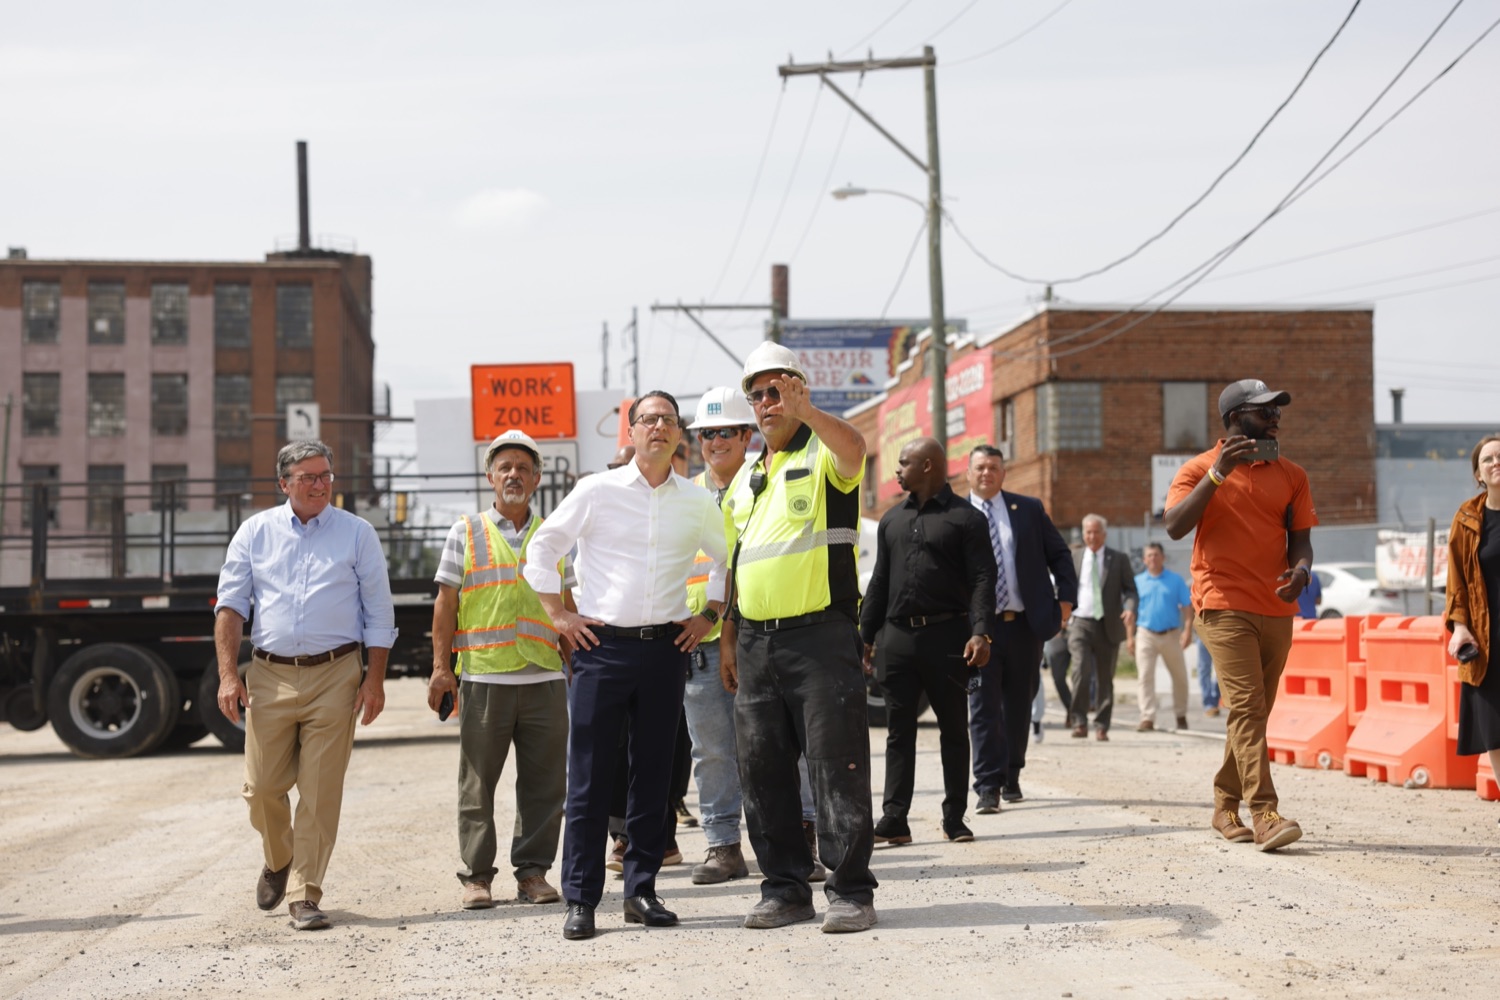 Governor Shapiro, PennDOT Secretary Carroll Announce I-95 Will Reopen This Weekend as the Shapiro Administrations Response Continues Ahead of Schedule<br><a href="https://filesource.amperwave.net/commonwealthofpa/photo/Image2.jpeg" target="_blank">⇣ Download Photo</a>